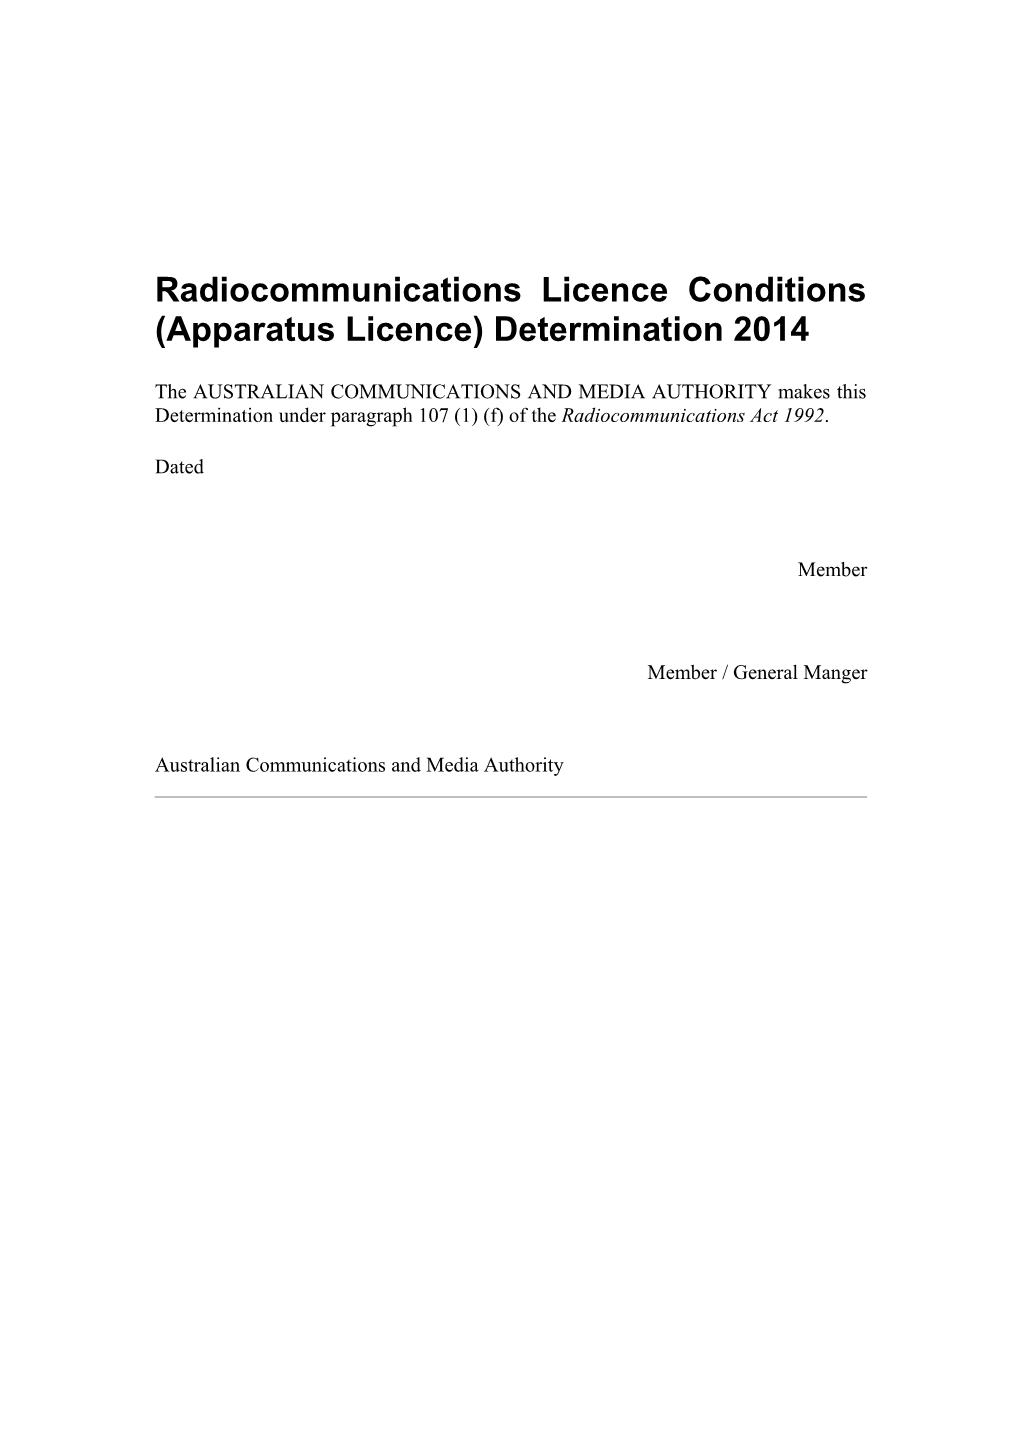 Radiocommunications Licence Conditions (Apparatus Licence) Determination 2014